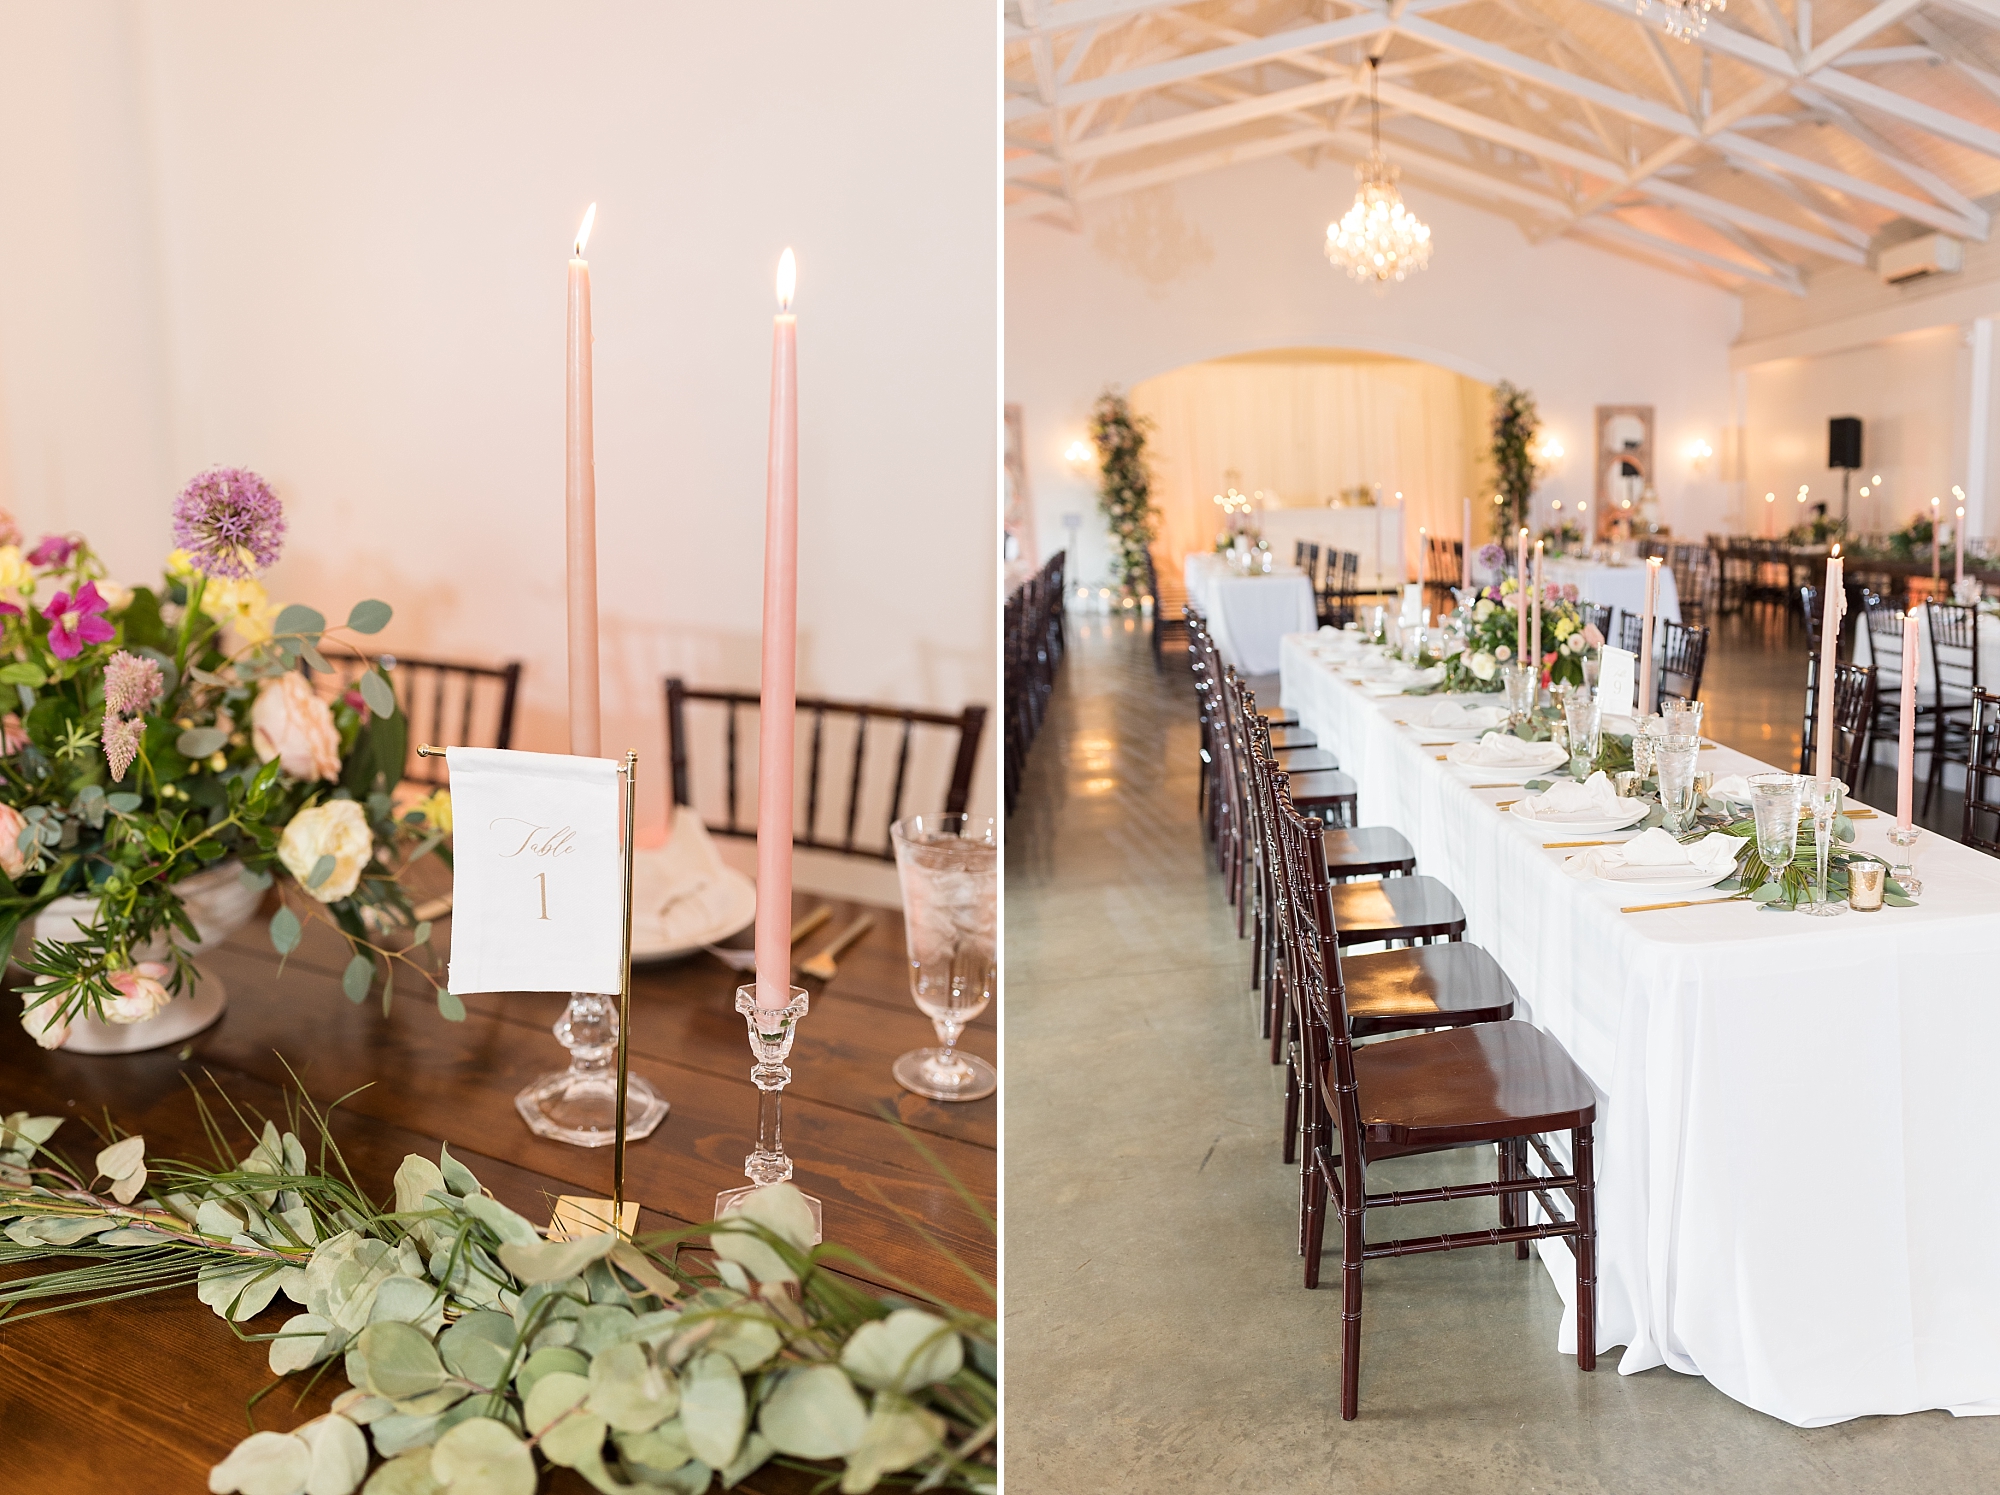 Reception details in the Carriage house | Merrimon Wynne Wedding | Sarah Hinckley Photography | Raleigh NC Wedding Photographer